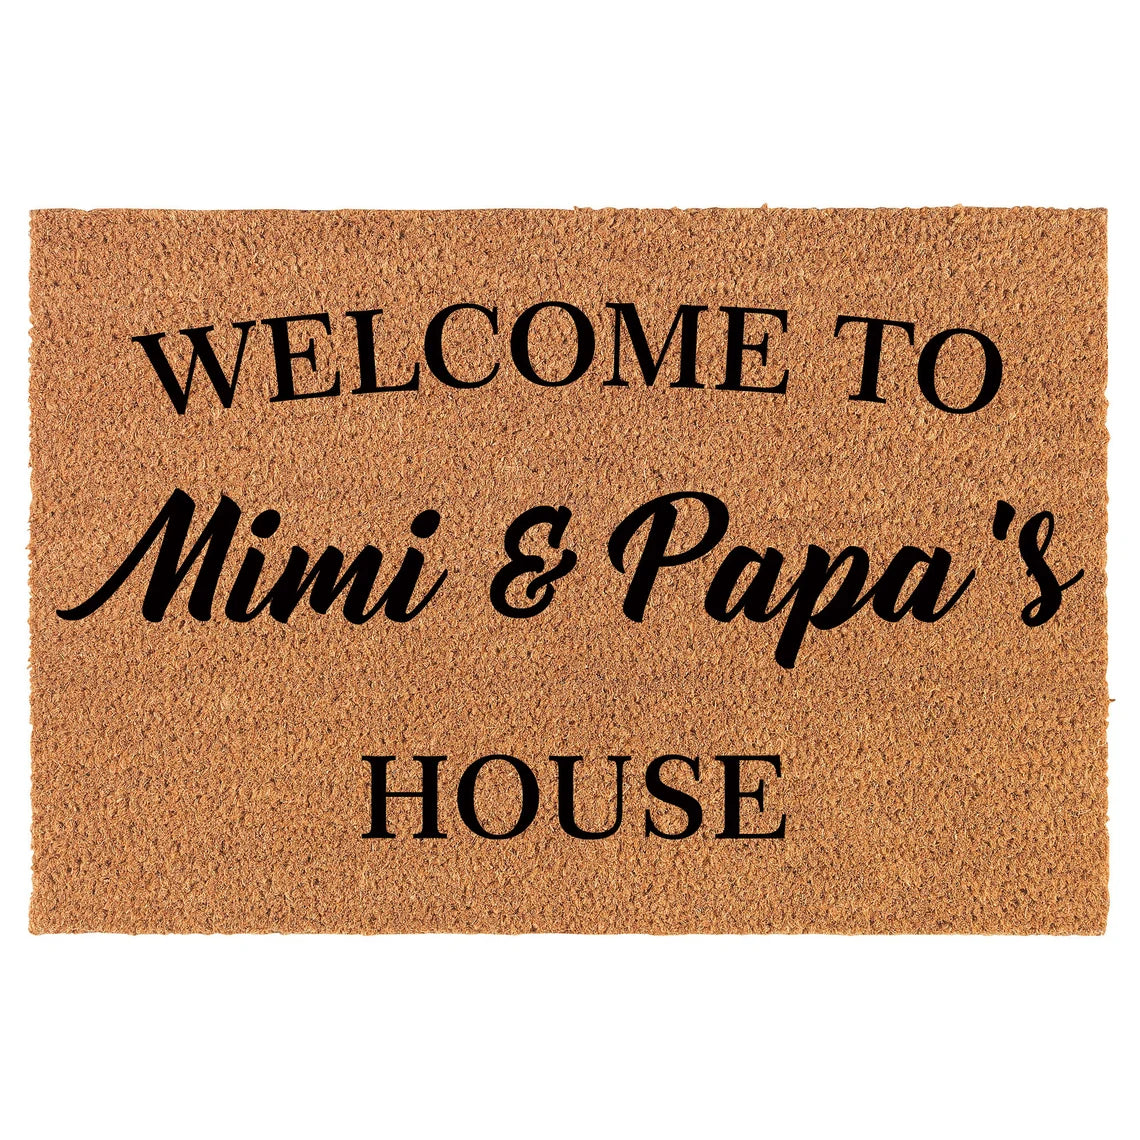 Coir Doormat Front Door Mat New Home Closing Housewarming Gift Welcome to Mimi and Papa's House Grandma Grandpa Grandparents Grandmother Grandfather (30" x 18" Standard)